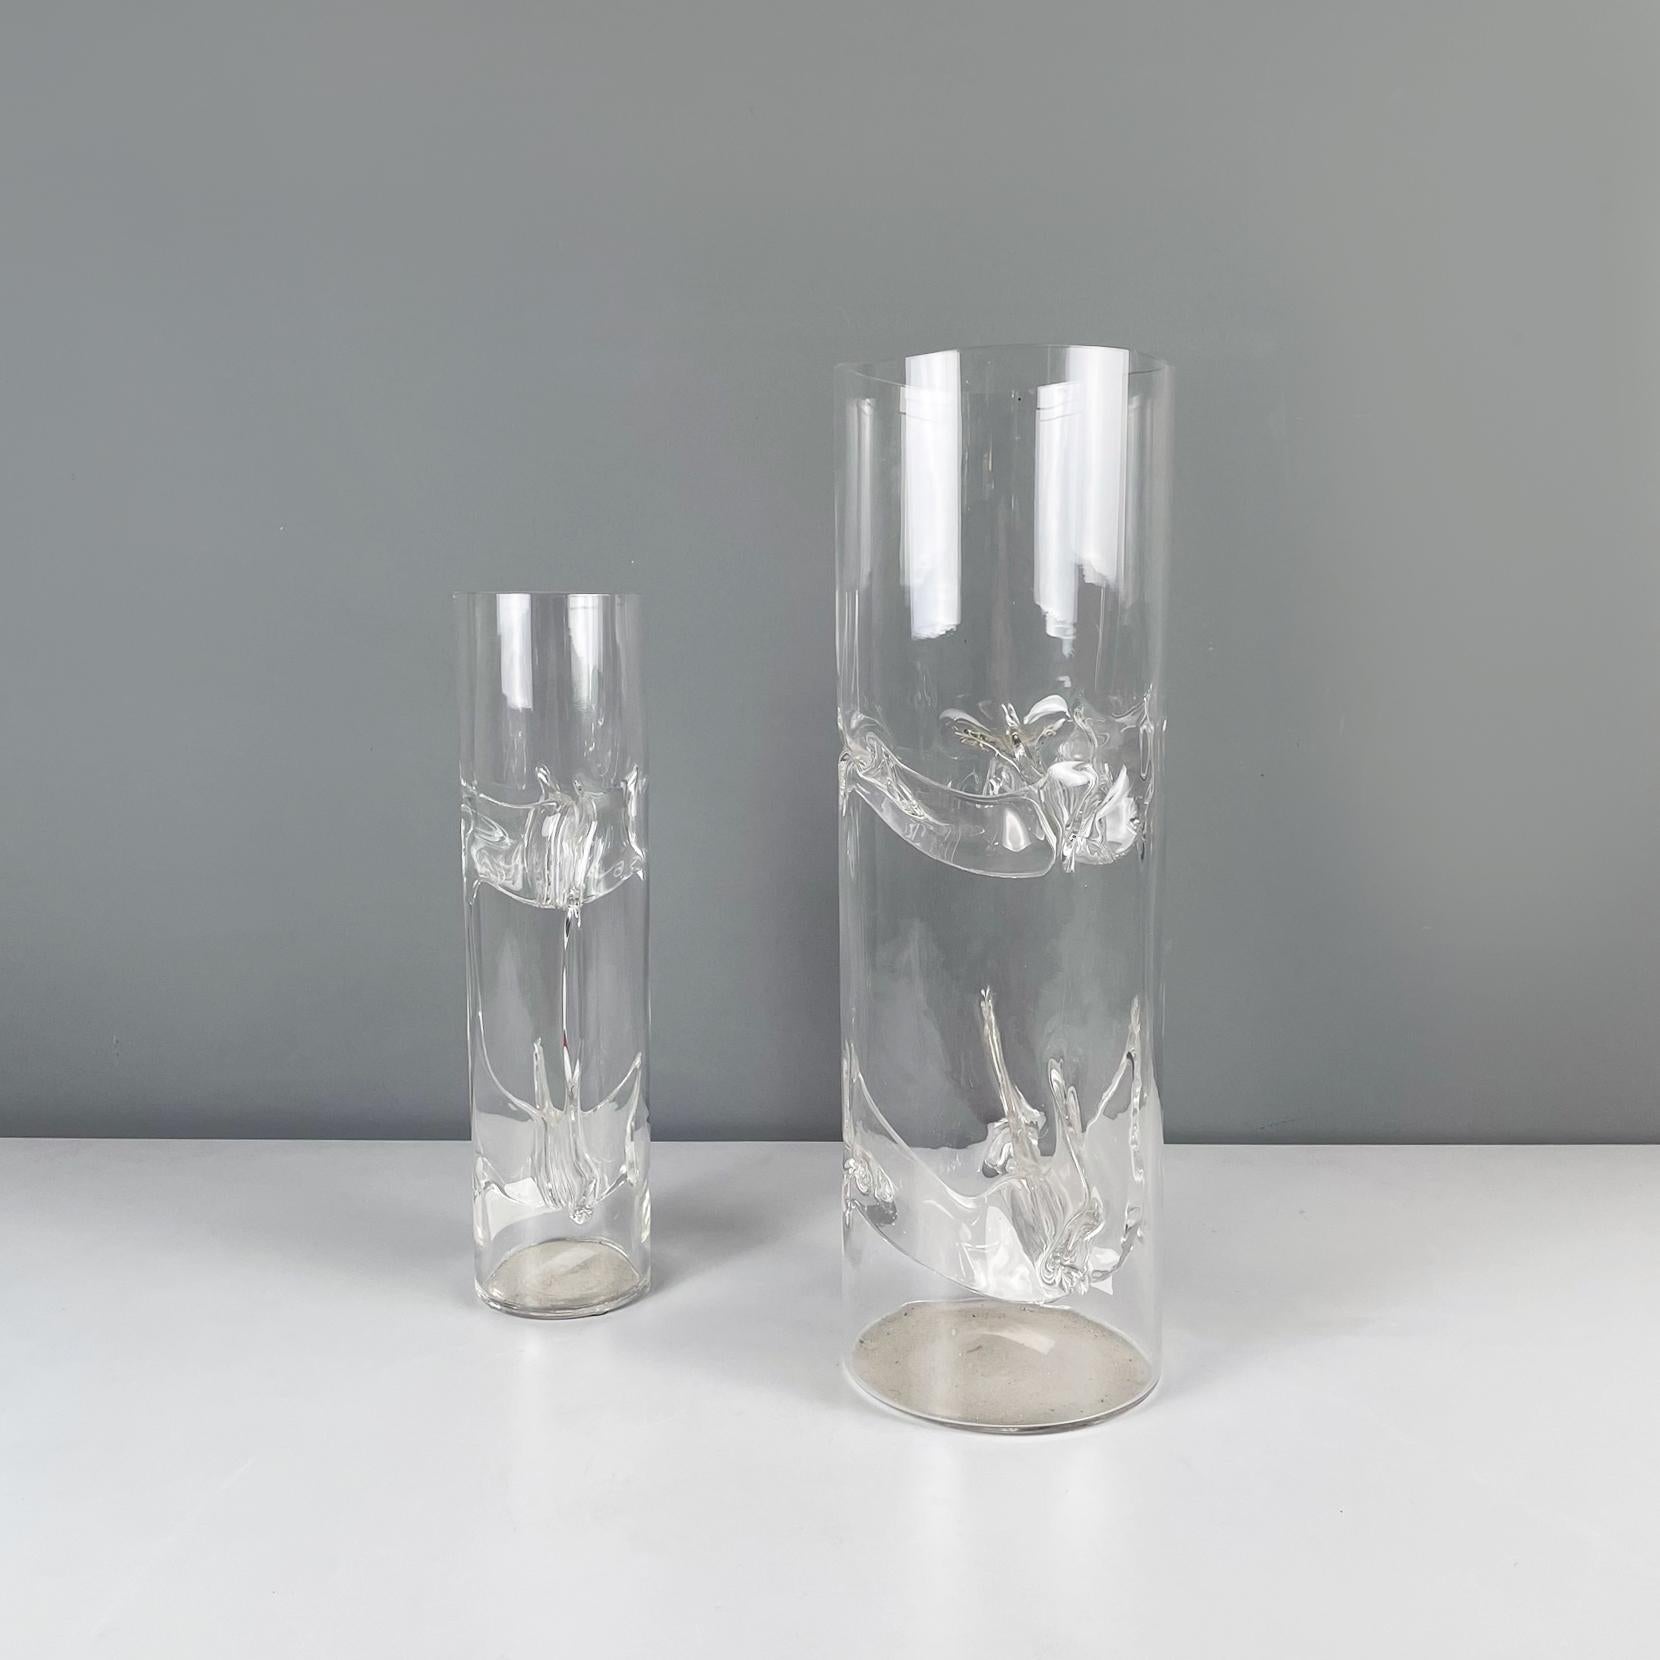 Italian modern Murano crystal Vases Membrana by Toni Zuccheri for VeArt, 1970s
Pair of particular and fantastic vases mod. Membrana of different sizes in transparent Murano crystal. Inside the cylindrical structure there are a series of crystal